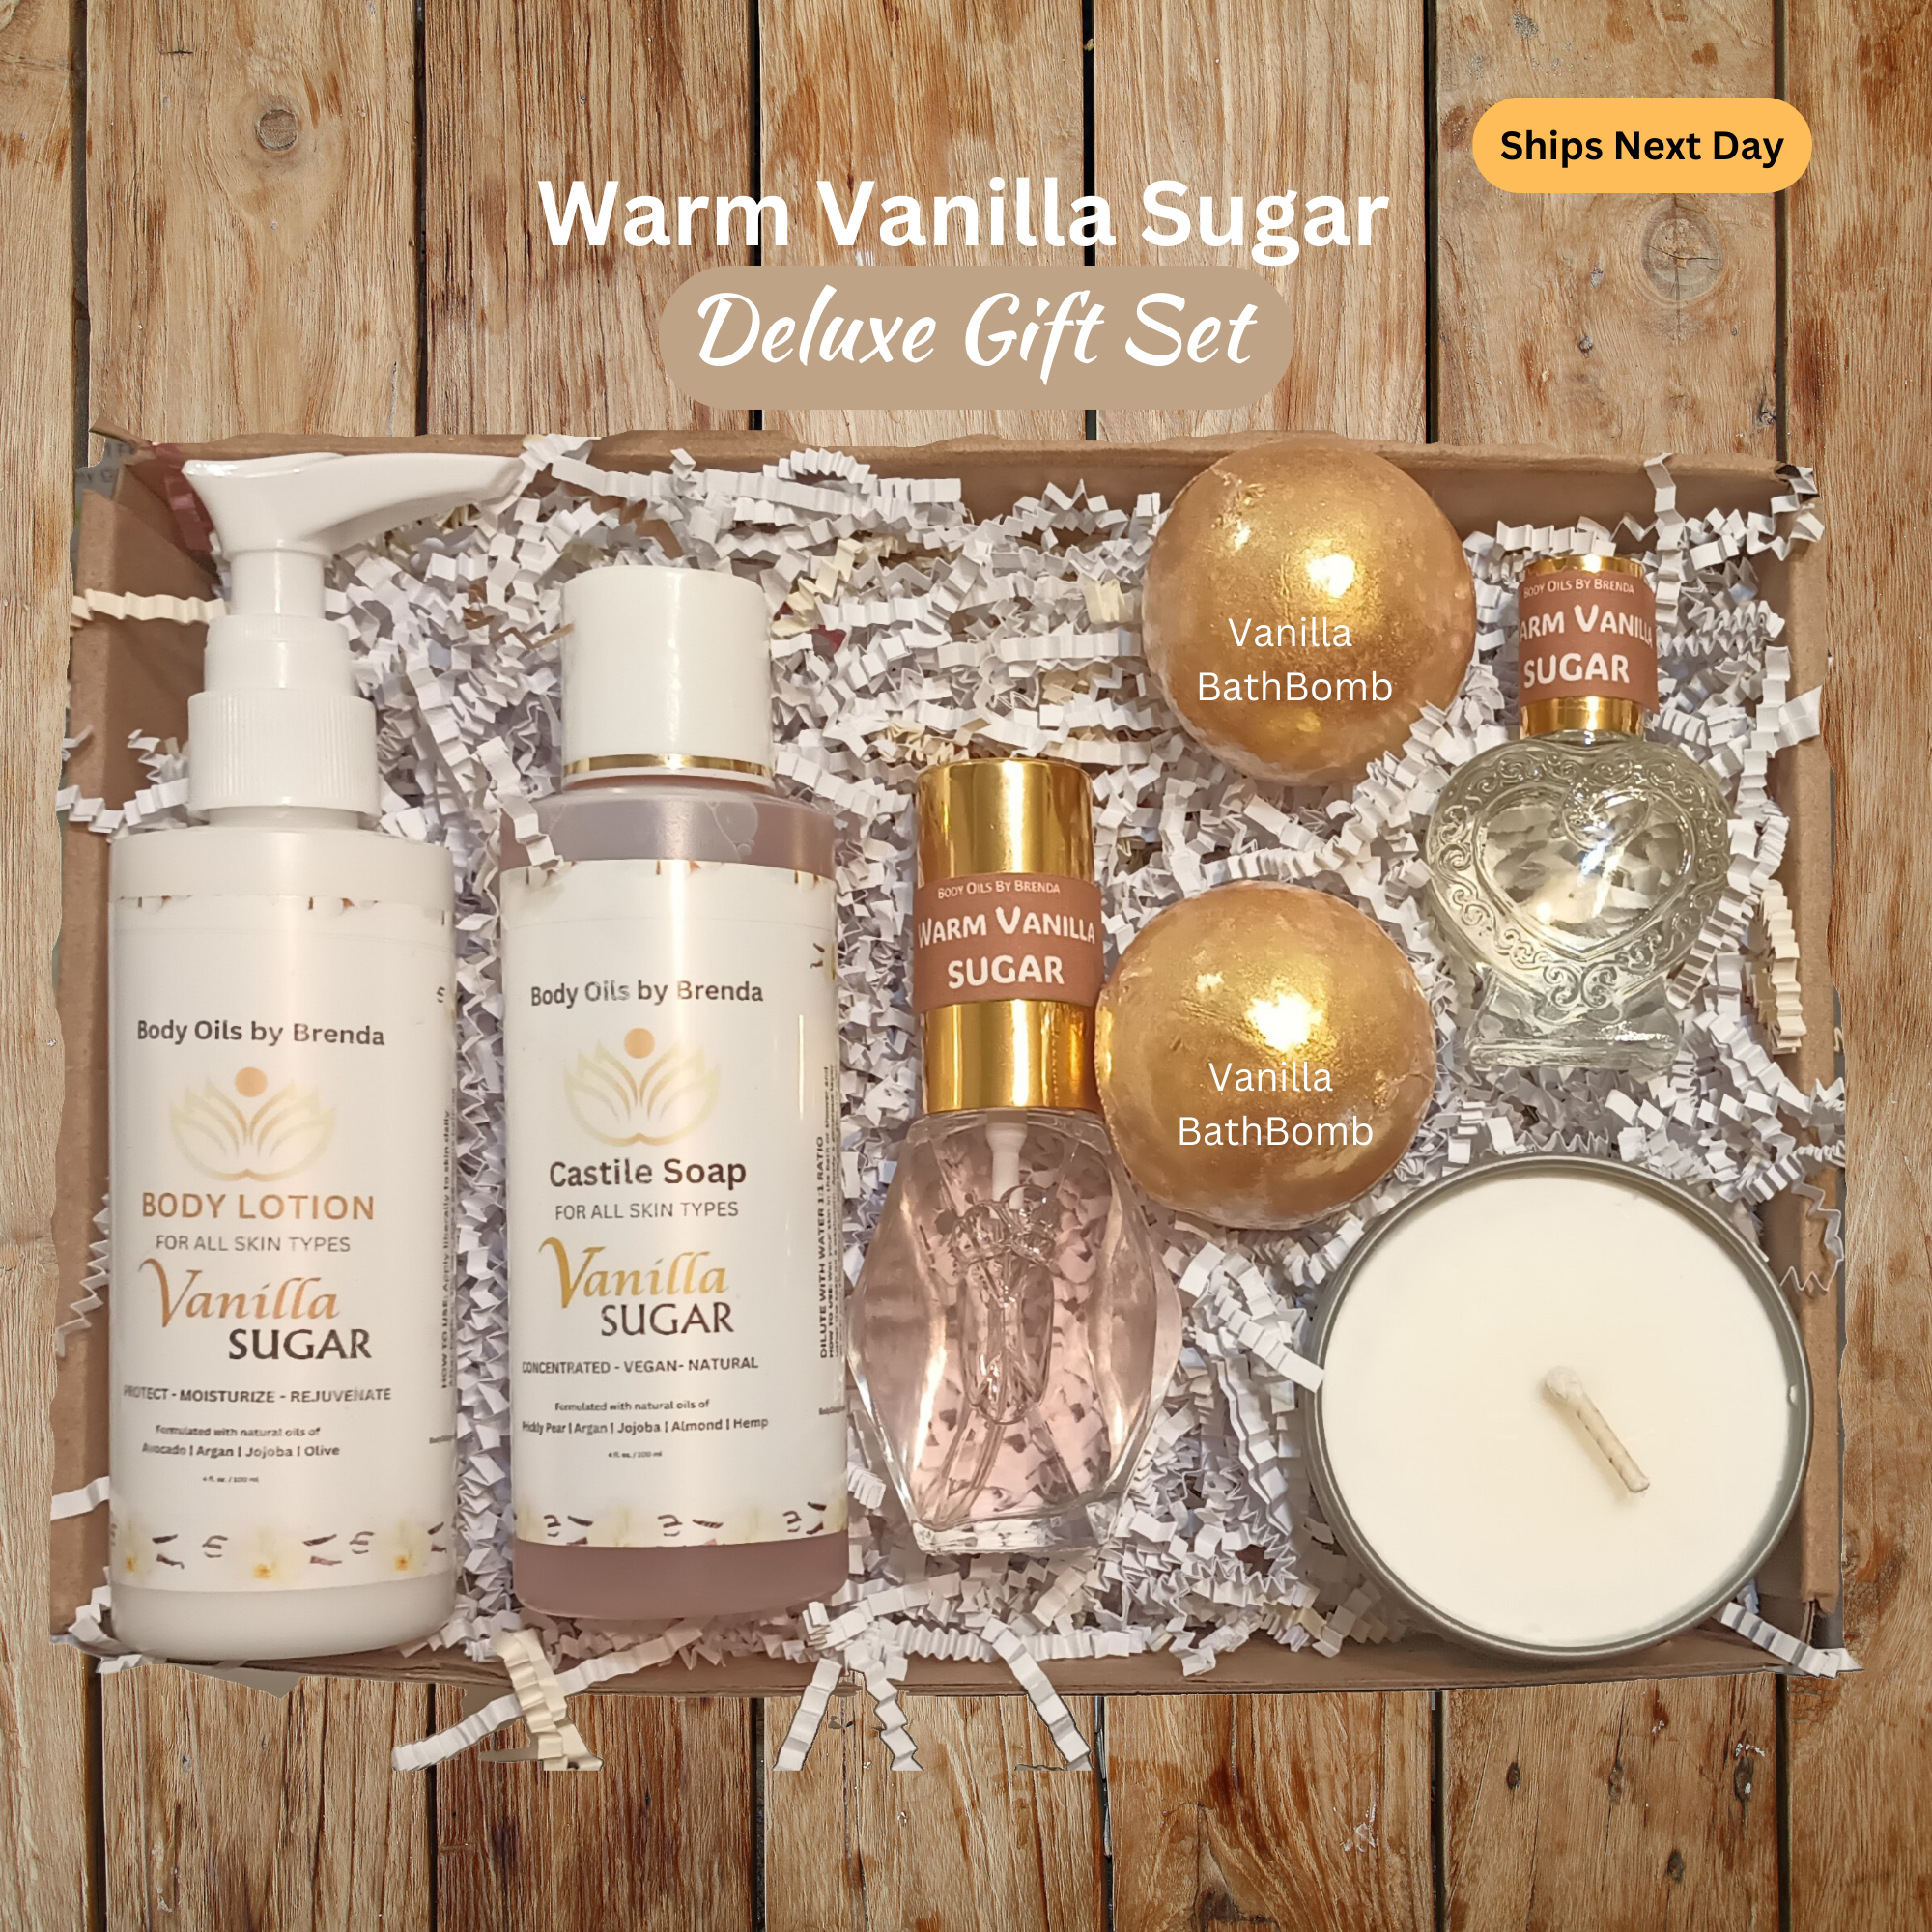 Pampering Warm Vanilla Sugar Luxury Gift Set, Relaxation Gifts for